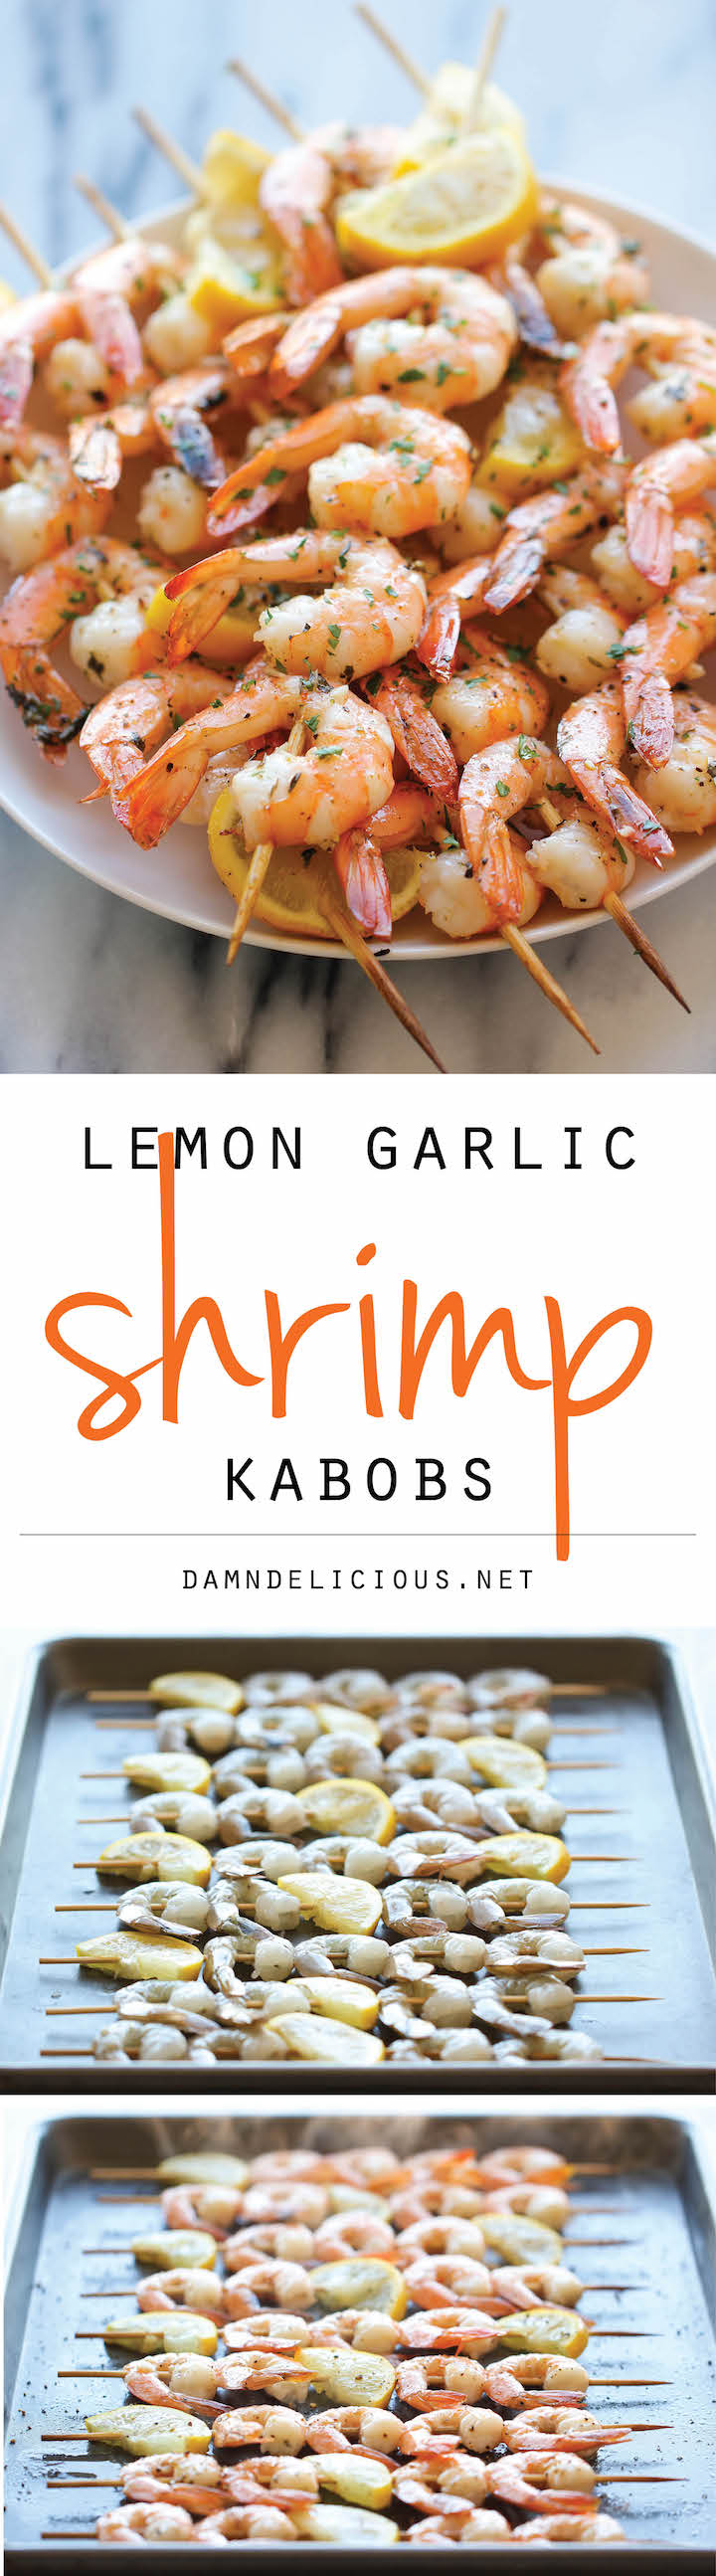 Lemon Garlic Shrimp Kabobs - The easiest, most flavorful way to prepare shrimp - so perfect for summer grilling or roasting!